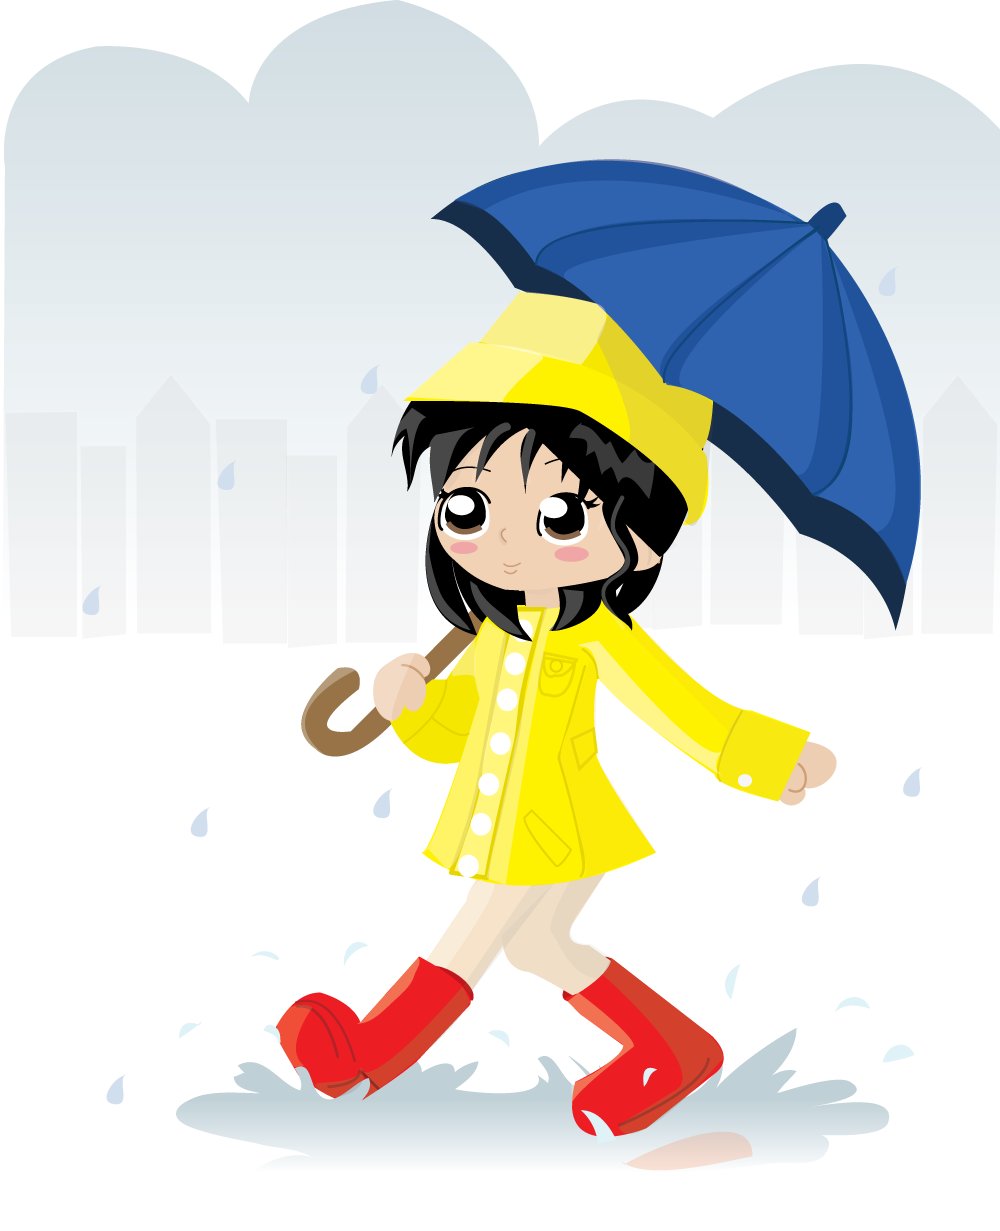 Clip Arts Related To : rainy images for kids. 